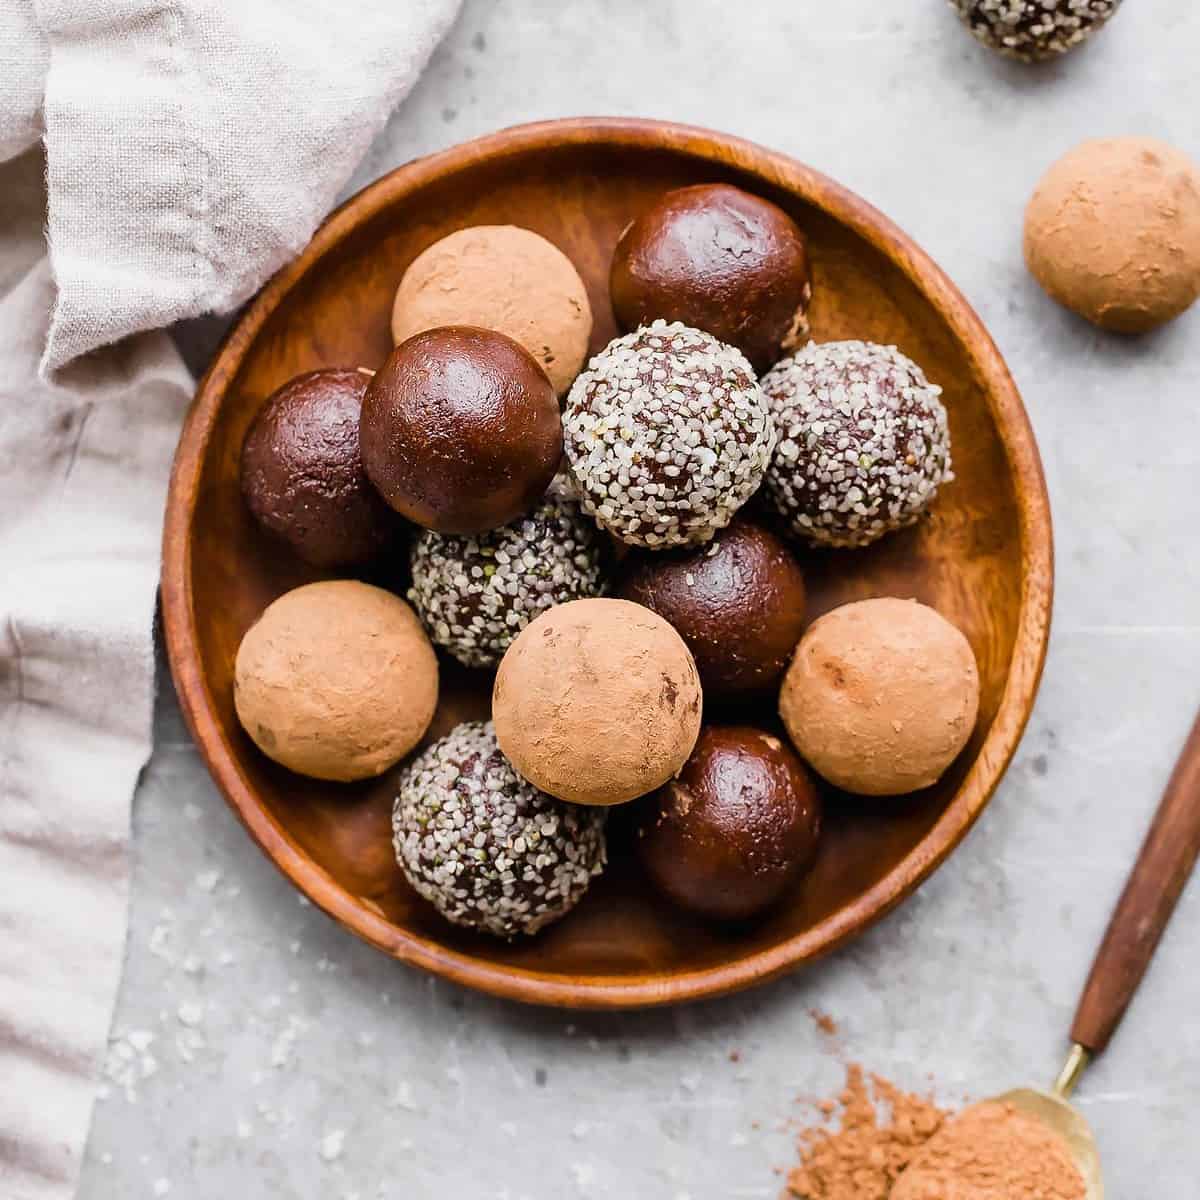  With only a handful of ingredients, these truffles are a great go-to when you need a quick and healthy snack.